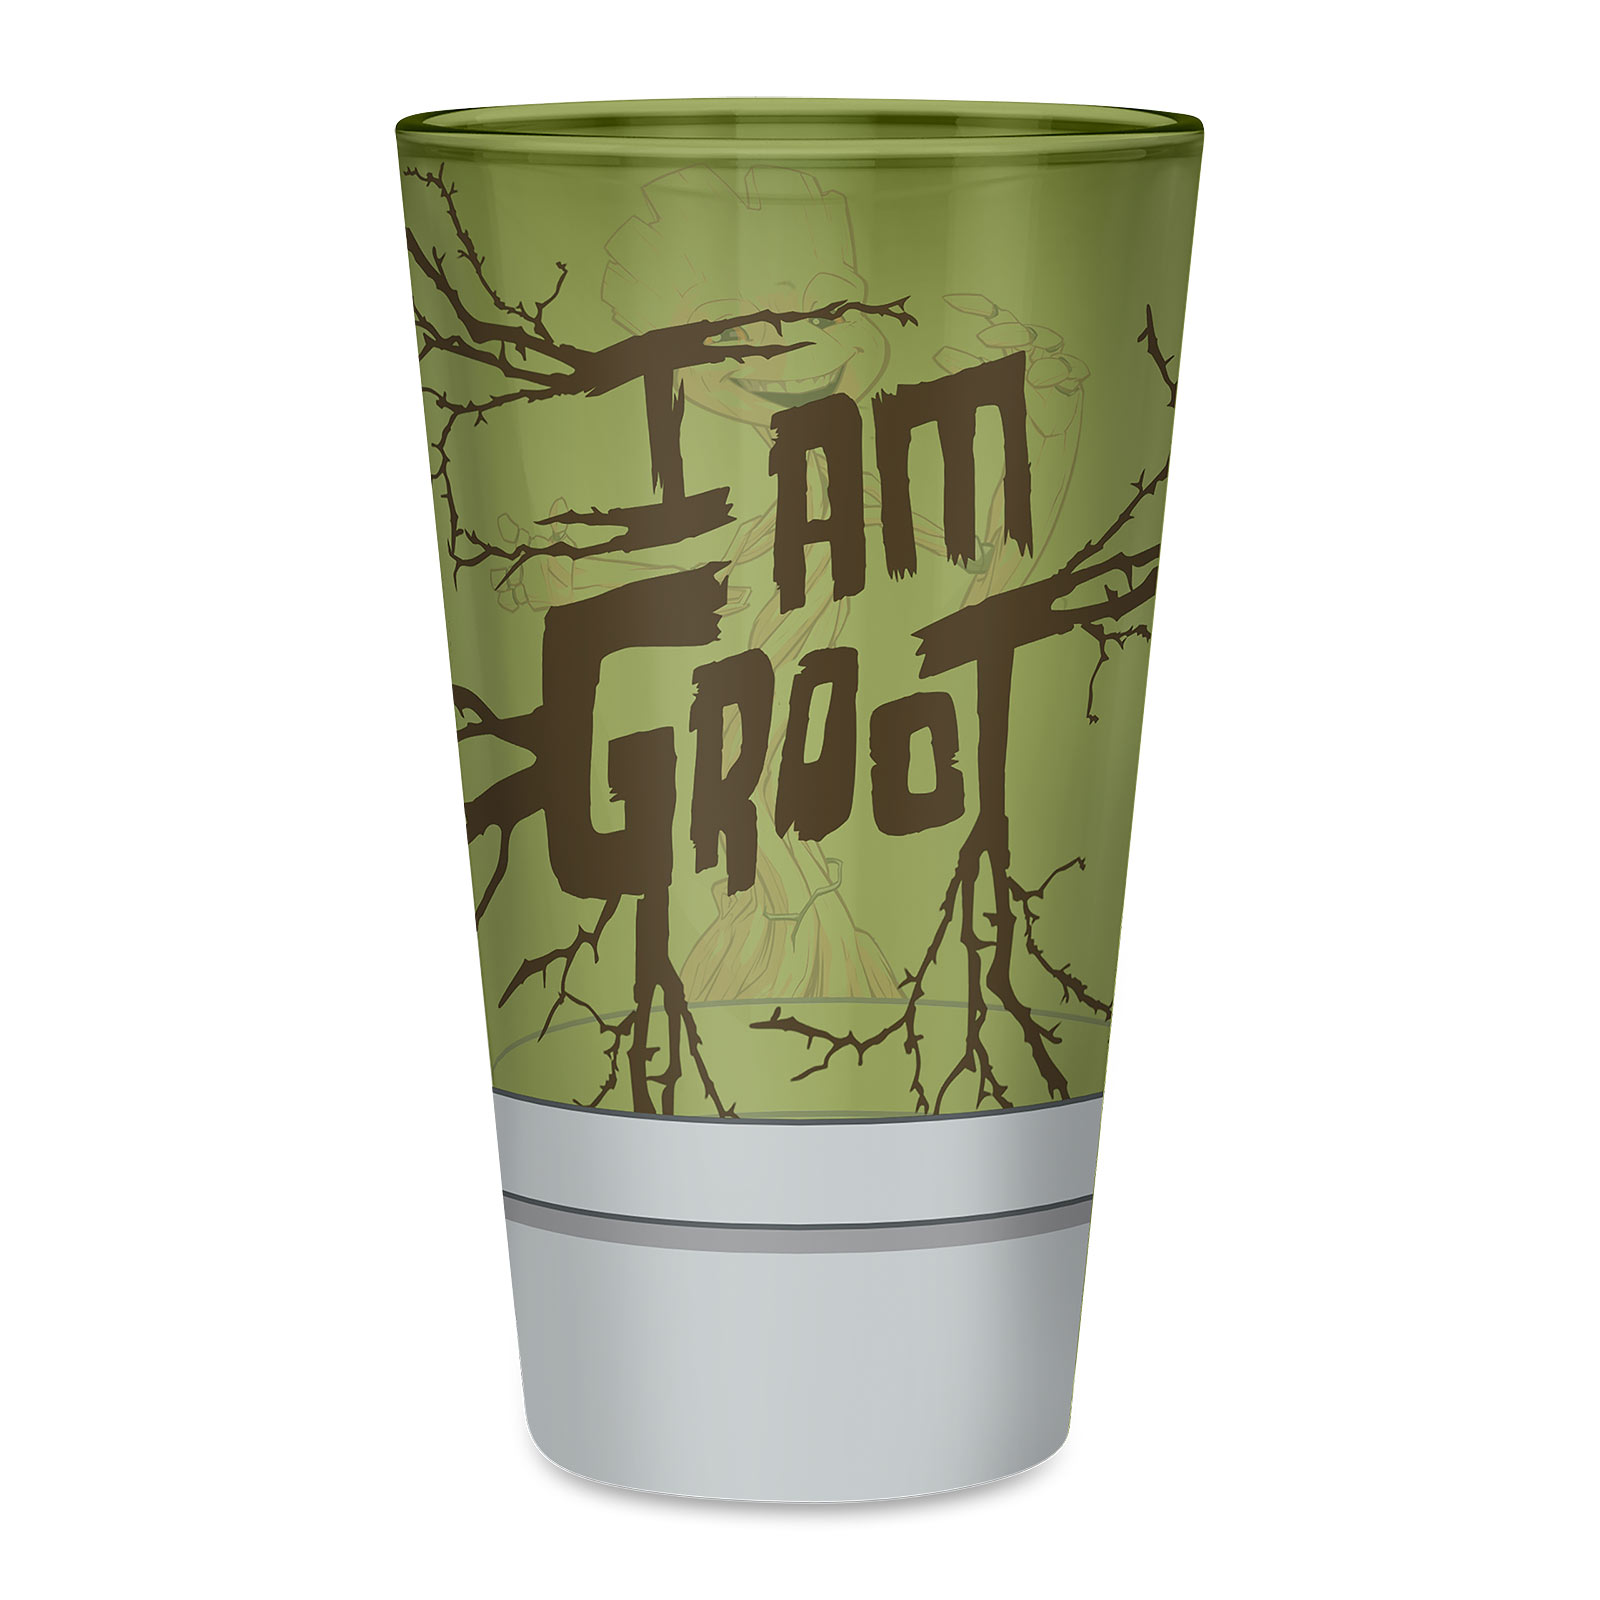 Guardians of the Galaxy - Groot Glass